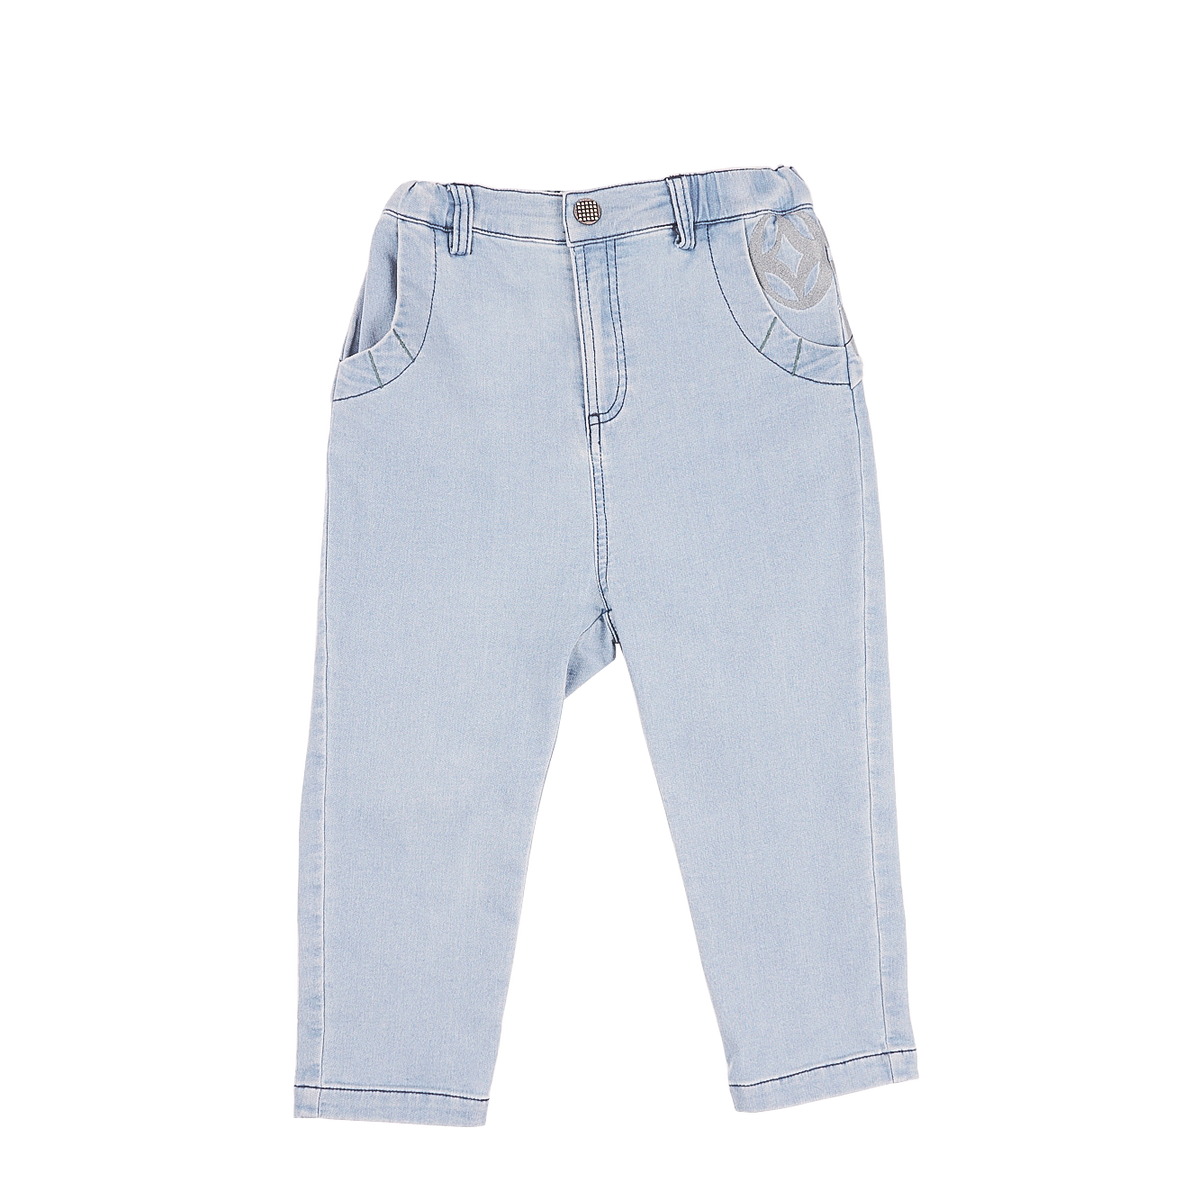 Denim kids trousers with good fortune and coin motif